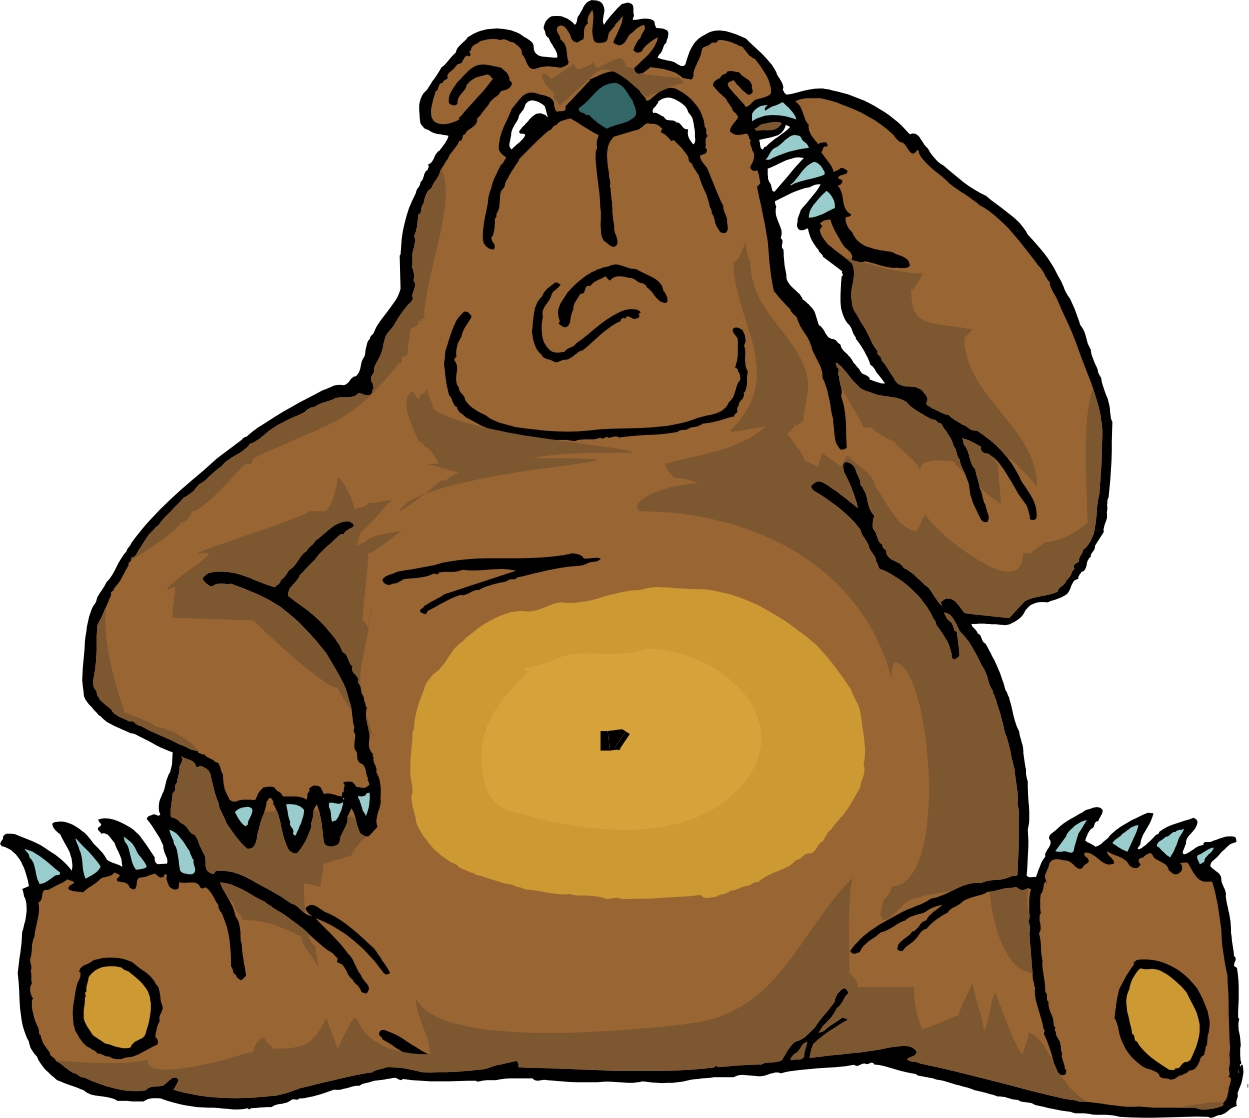 Free Angry Cartoon Bear, Download Free Clip Art, Free Clip